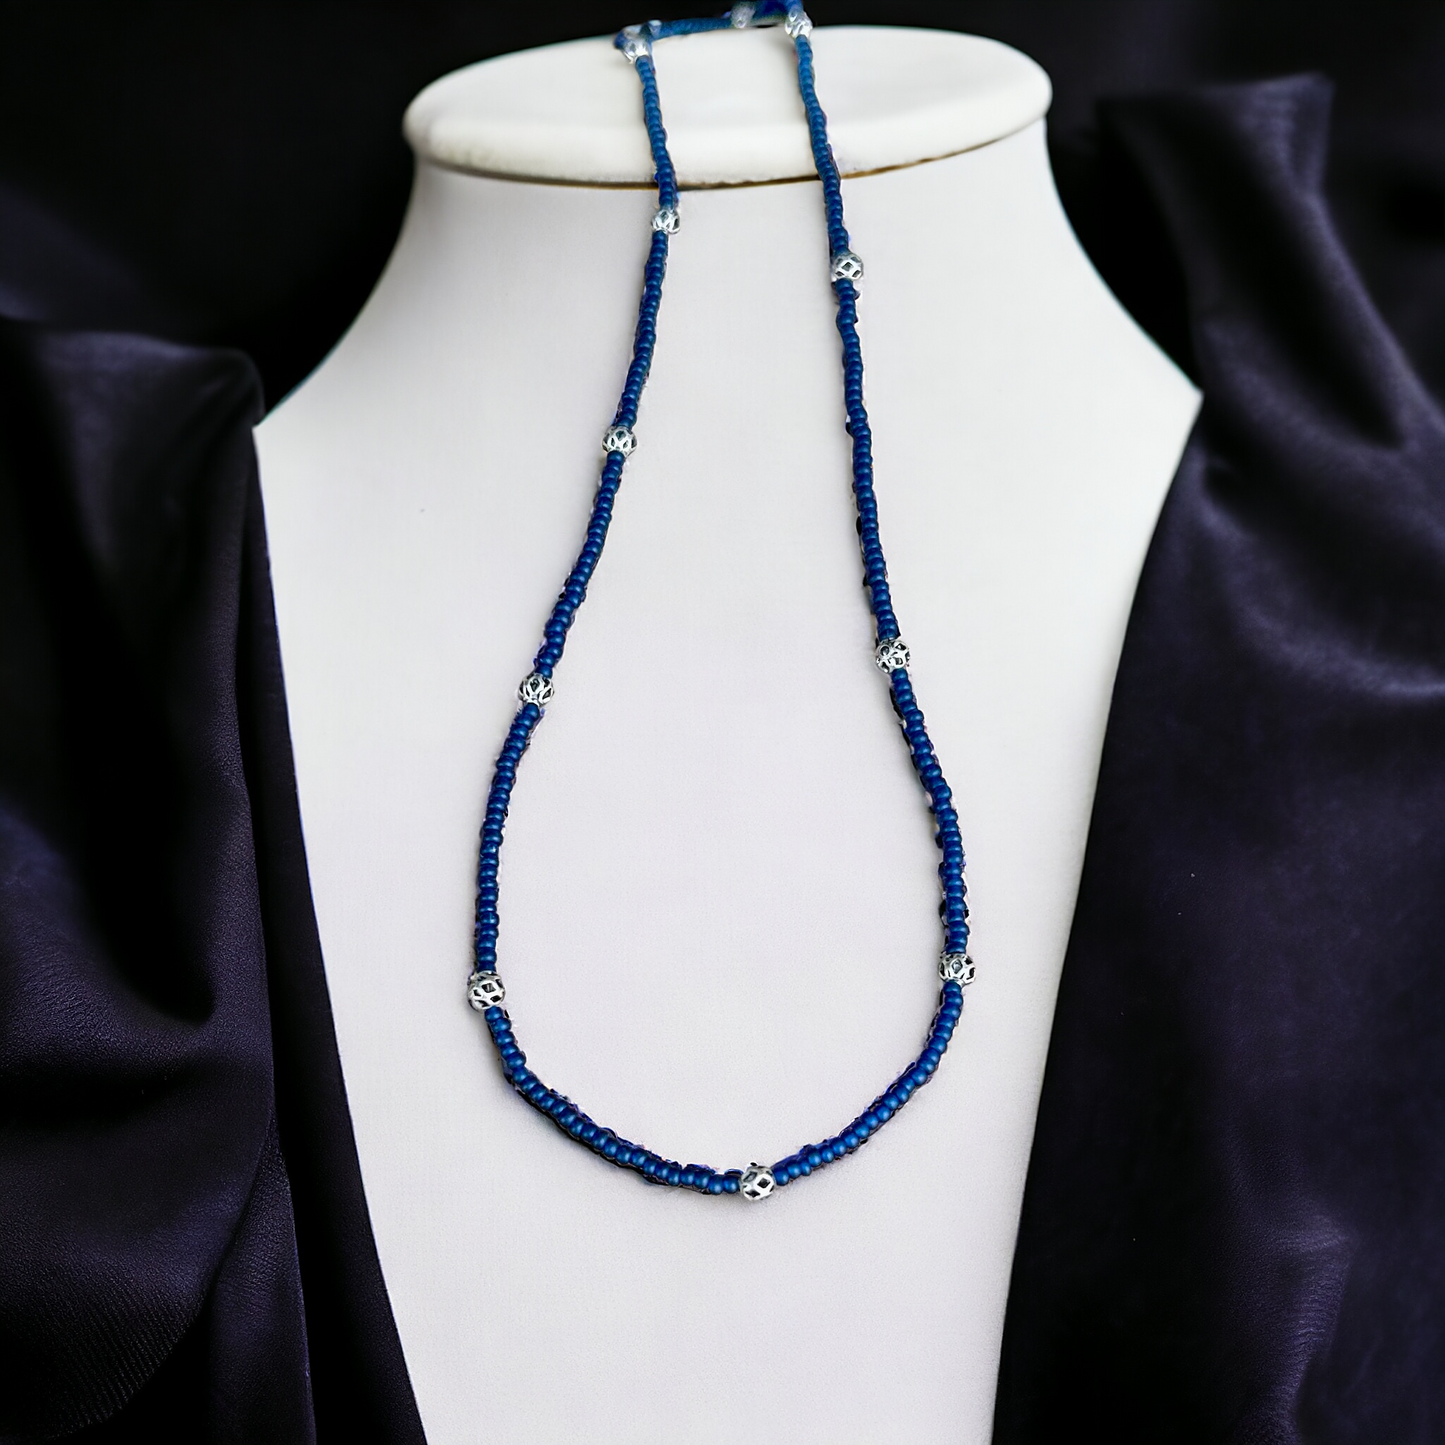 Navy Blue Seed Bead Stretchy Necklace with Latticed Silver Beads